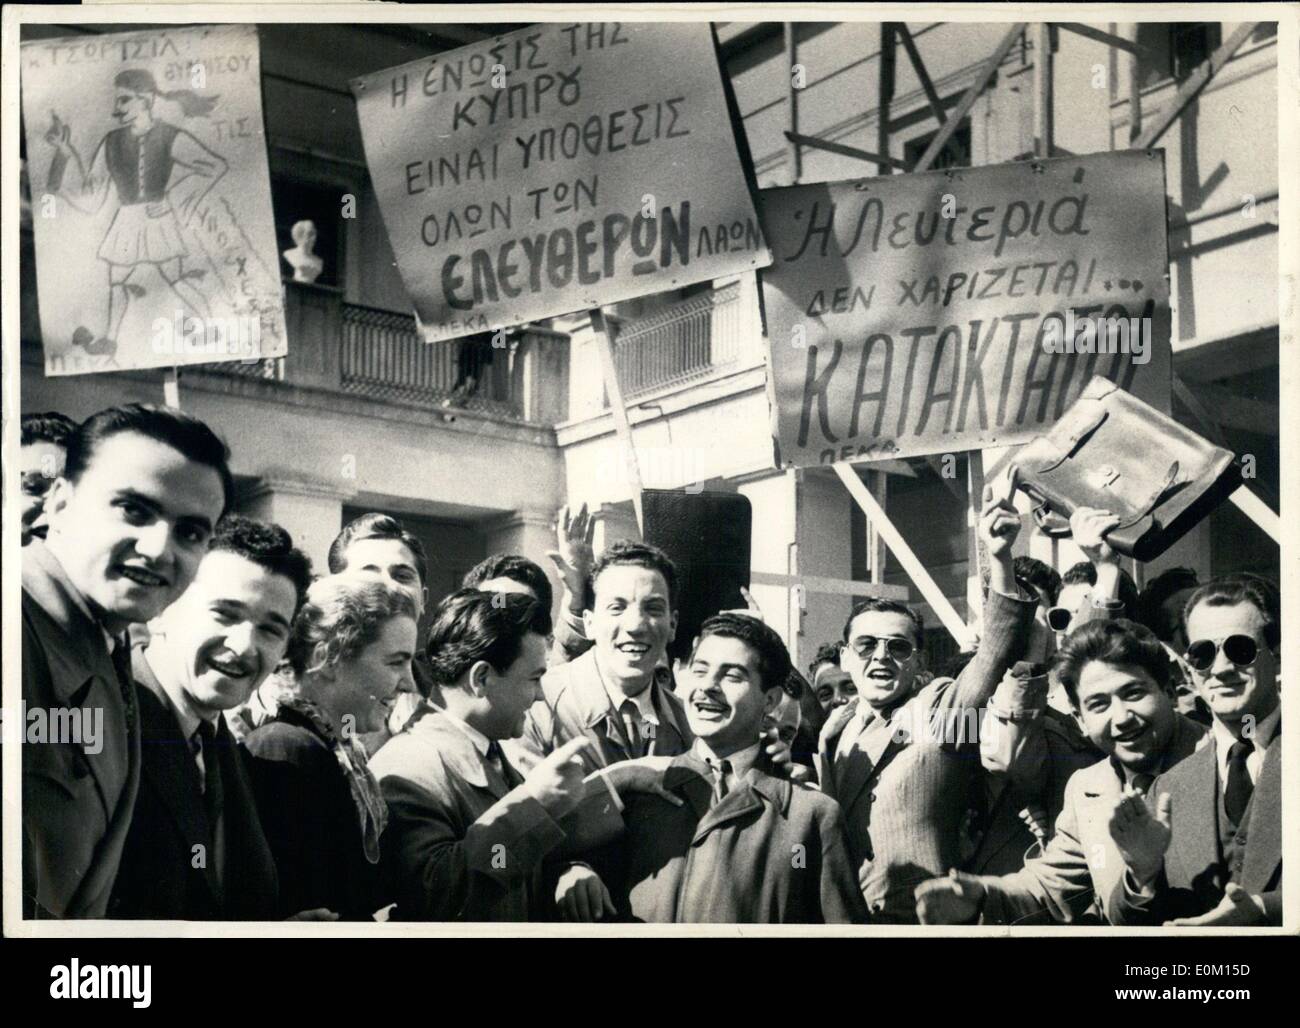 Mar. 03, 1953 - Students demonstrate in Athens over the Cyprus Question: A rowdy demonstration took place in Athens recently - over the old old question of Cyprus. It was originally organised by the students committee for Cypriot struggle as a protest against the United Nations' Assembly refusal to enter the Cypriot question on the agenda..The demonstration started very quietly in the Athens University Square. After a few fiery speeches the situation got out of hand when some students said to be communists - suggested going to the various embassies Stock Photo